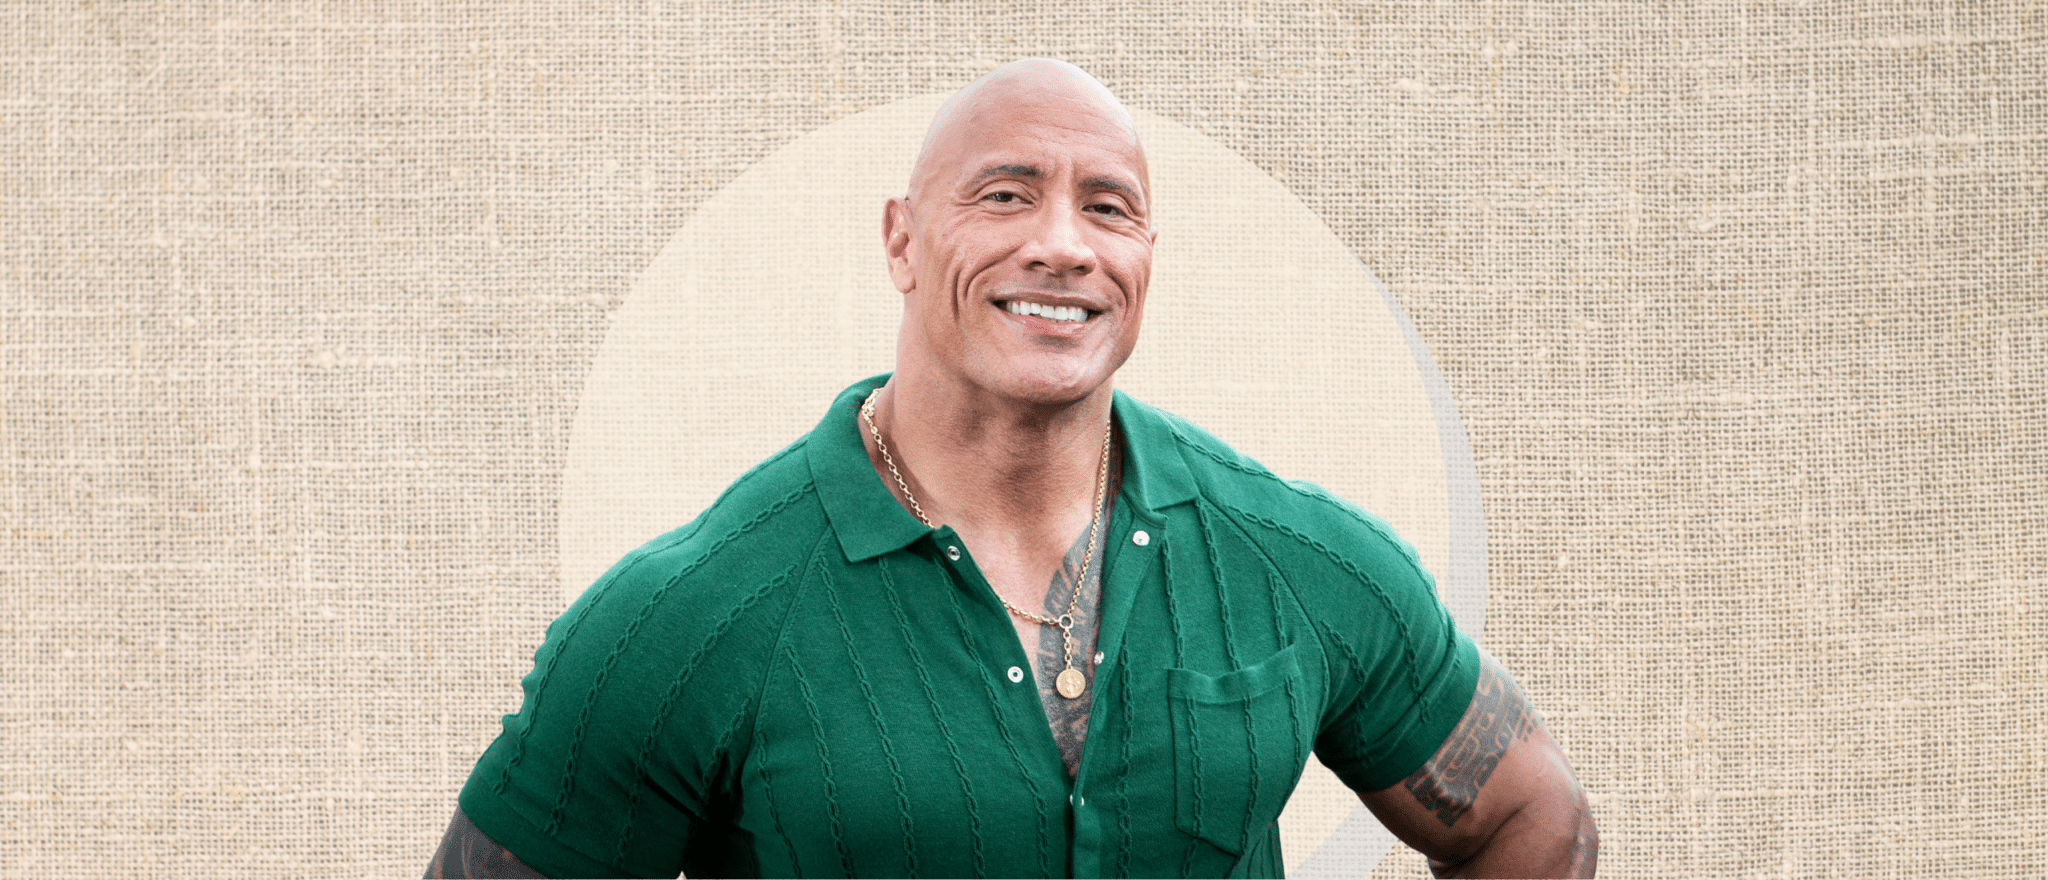 Here’s Why The Rock’s Depression Reveal Is So Important